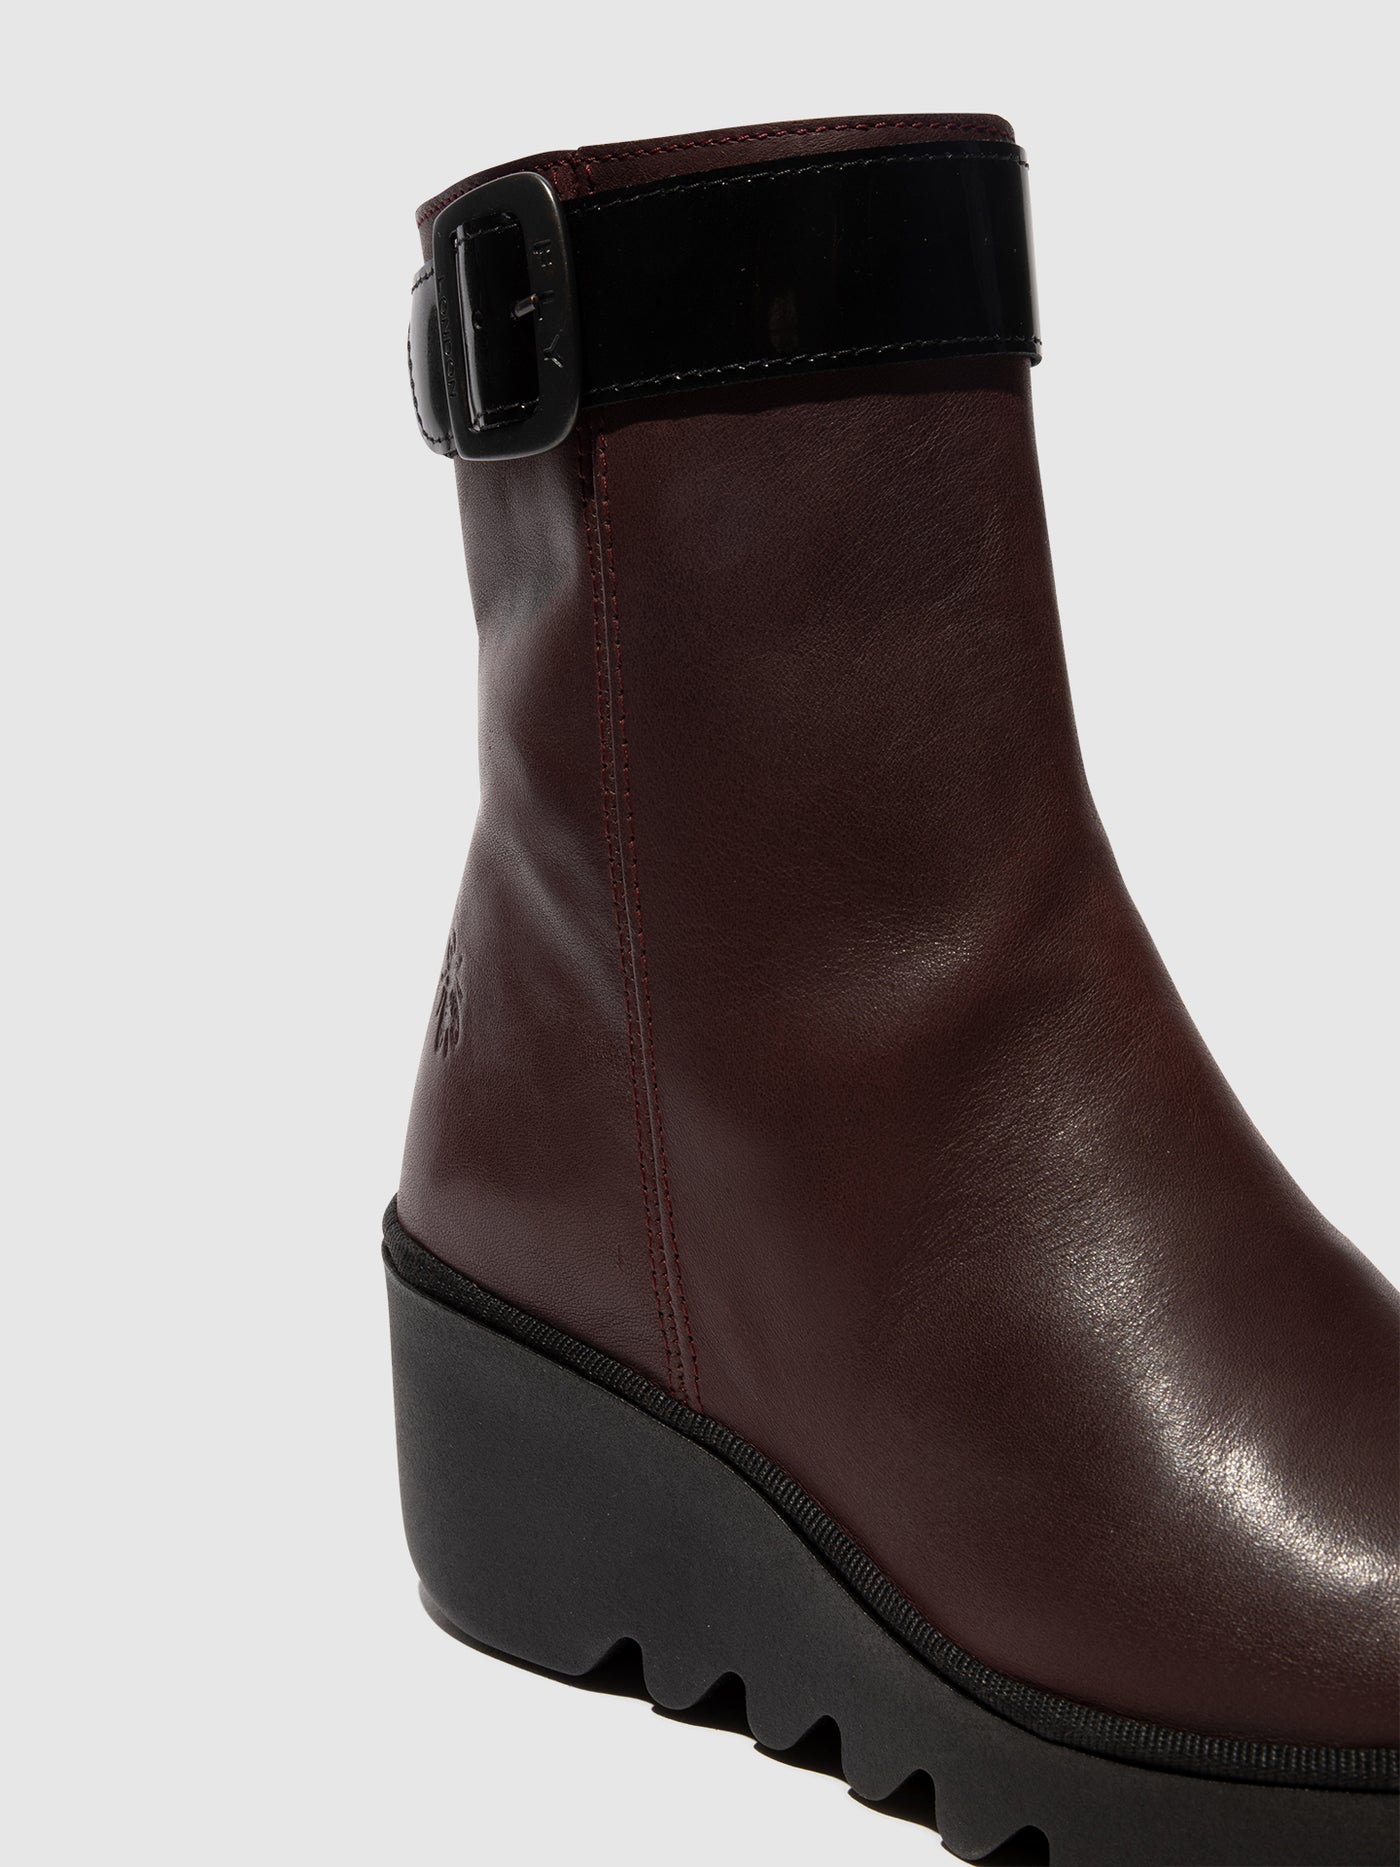 Zip Up Ankle Boots BEPP396FLY BORDEUX/BLACK